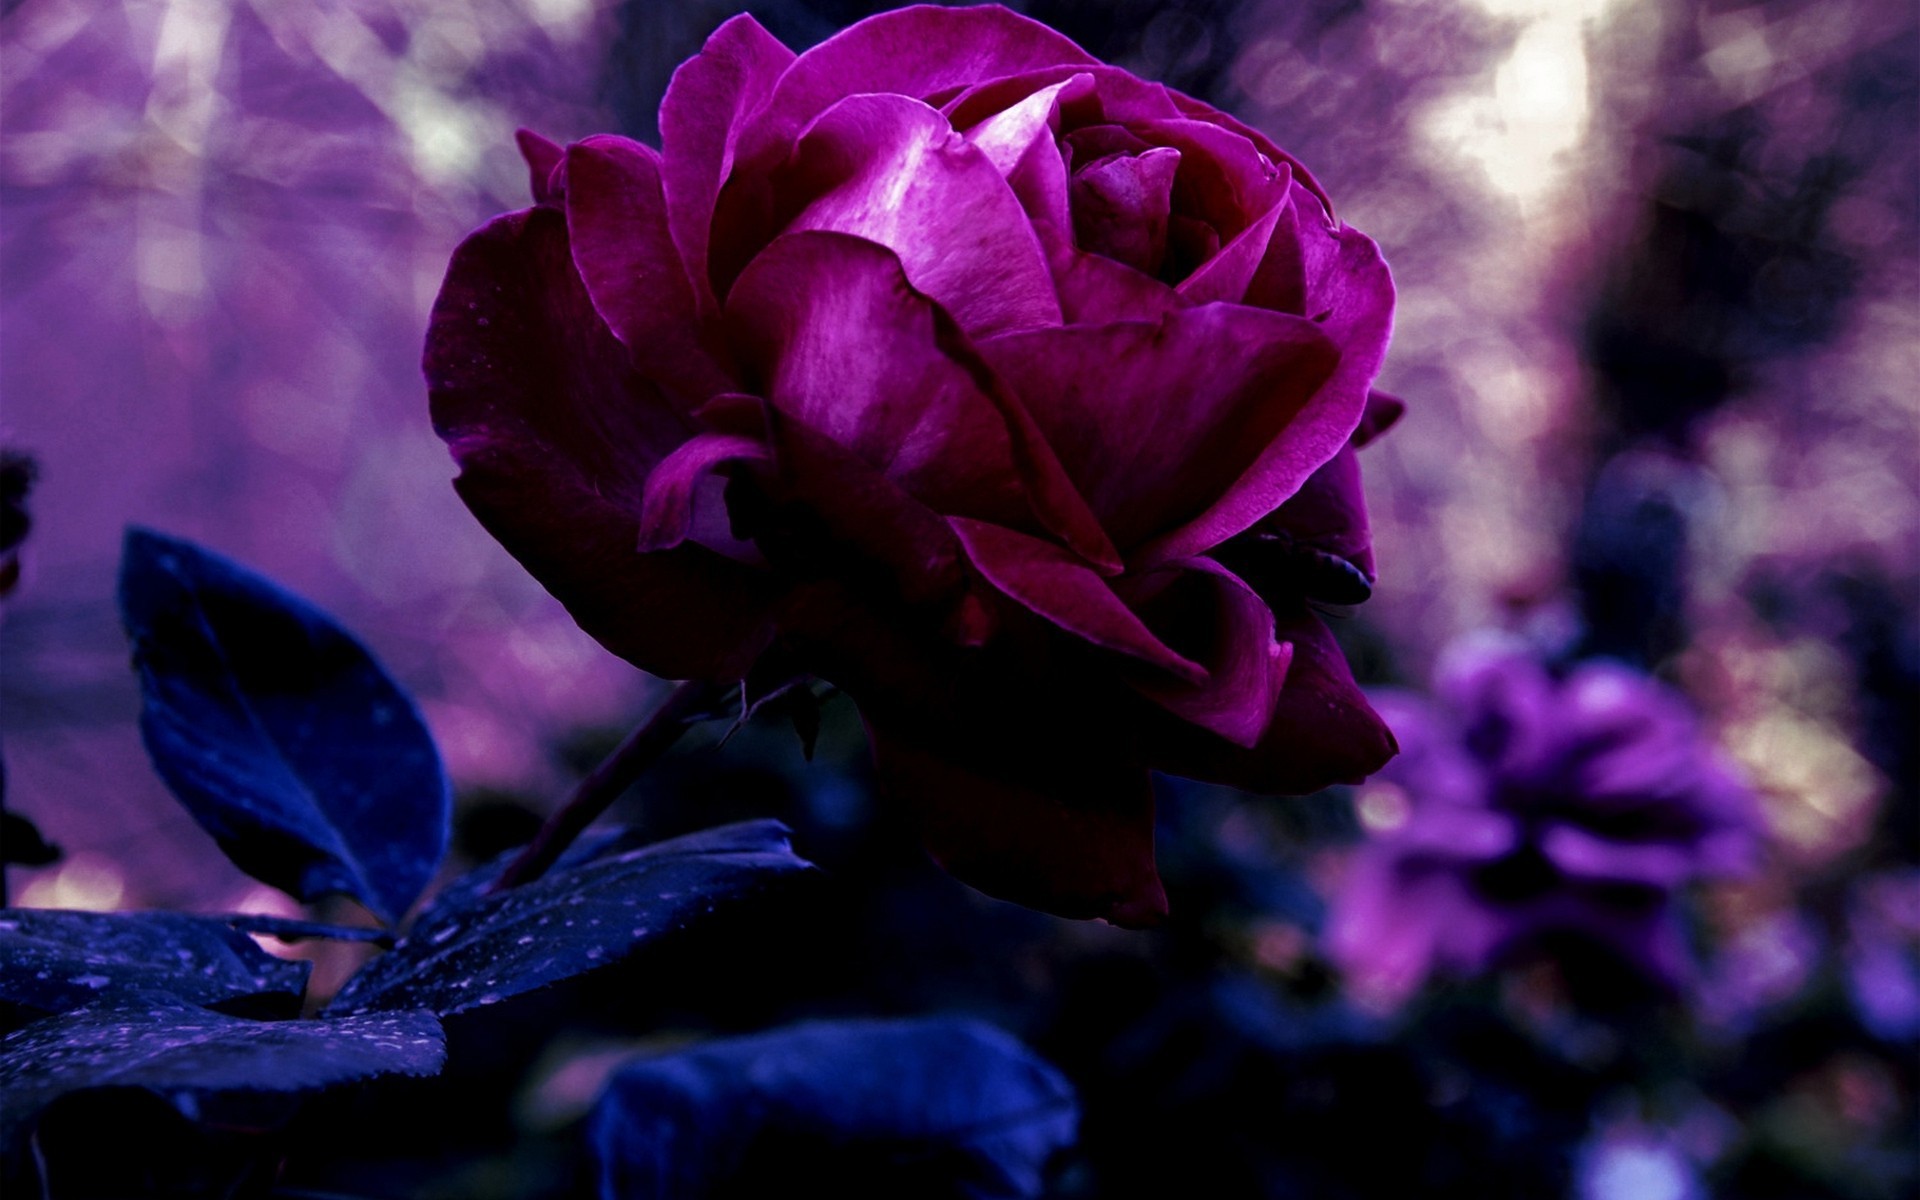 1920x1200 Purple rose wallpaper flag wallpapers hd wallpapers for free. Download